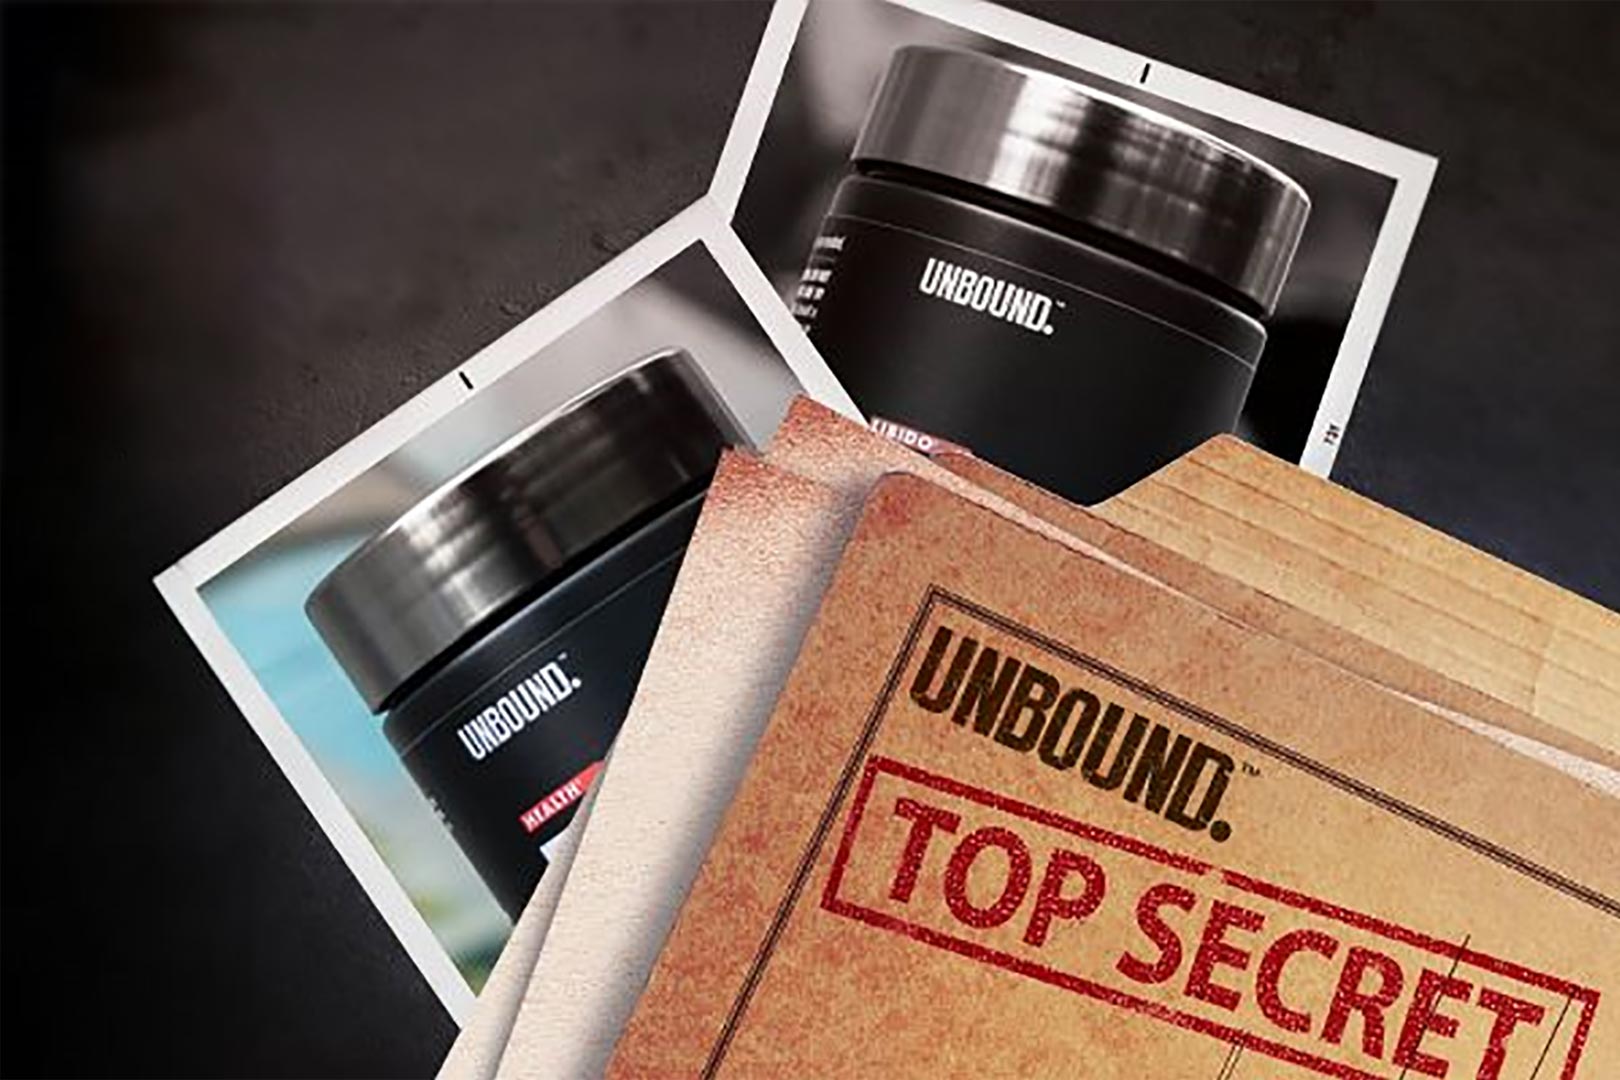 Two Upcoming Top Secret Unbound Products